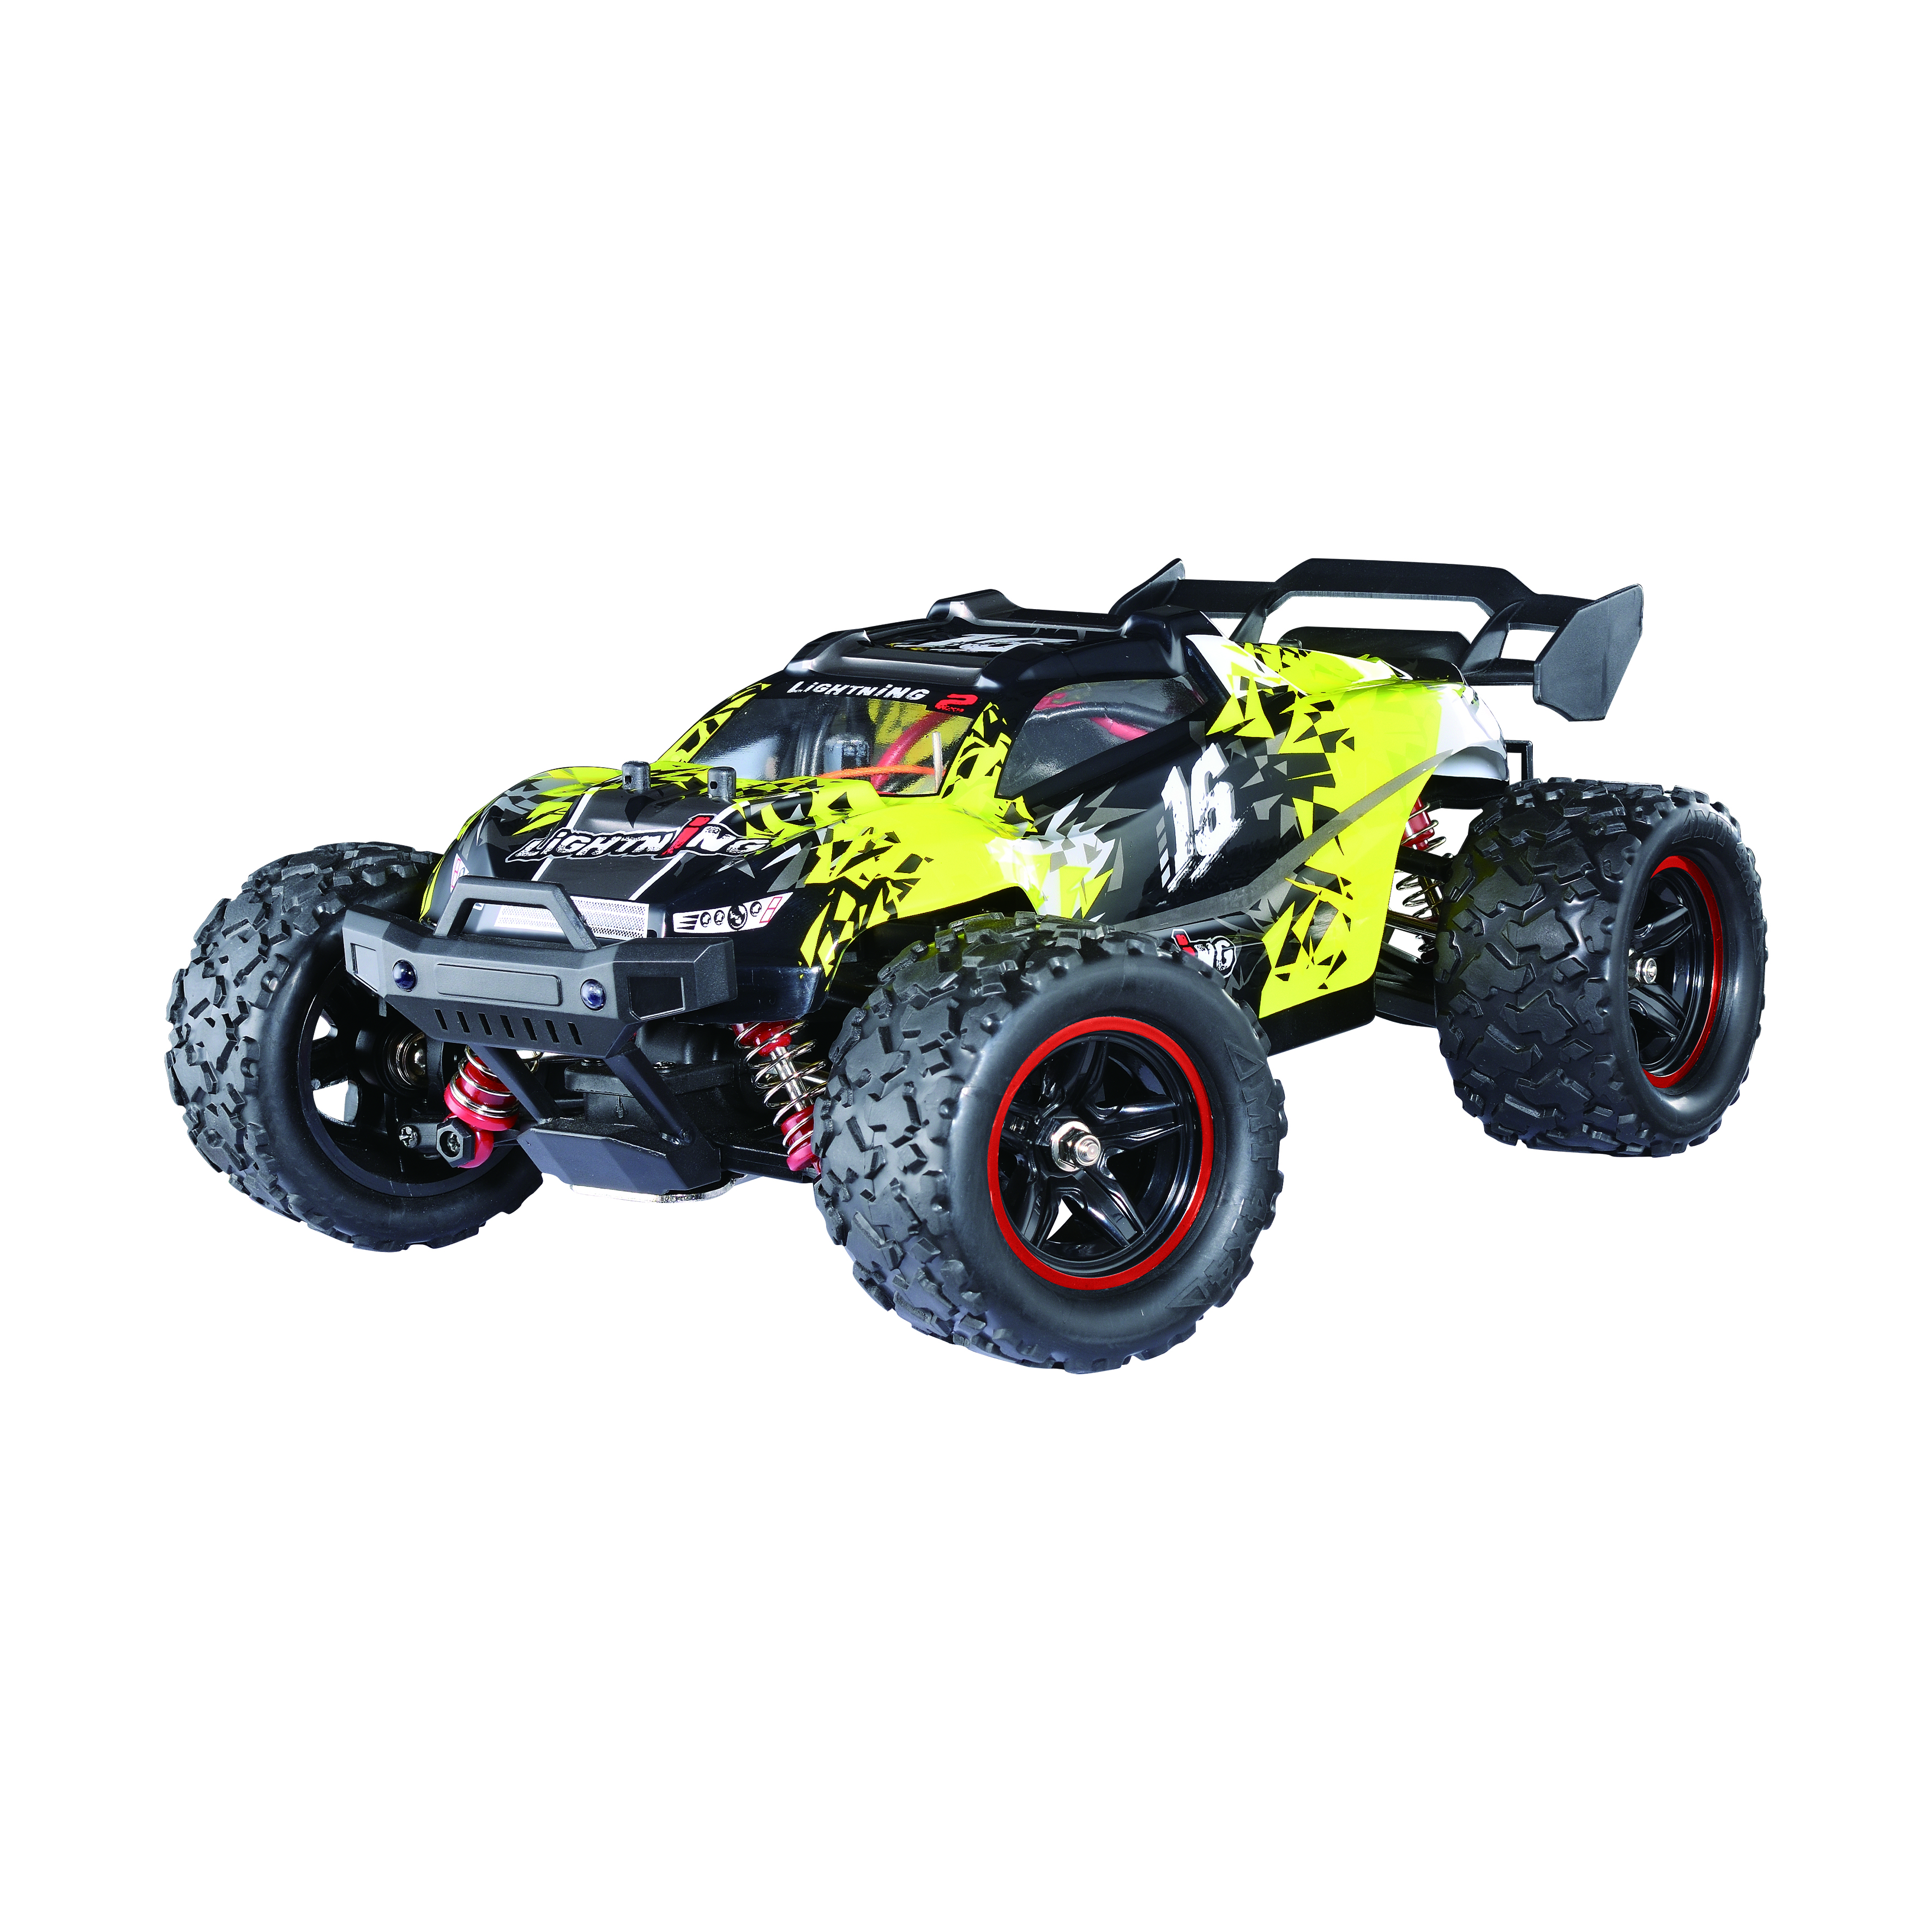 HS 18421 18422 18423 1/18 2.4G Alloy Brushless Off Road High Speed RC Car Vehicle Models Full Proportional Control Green 1 battery